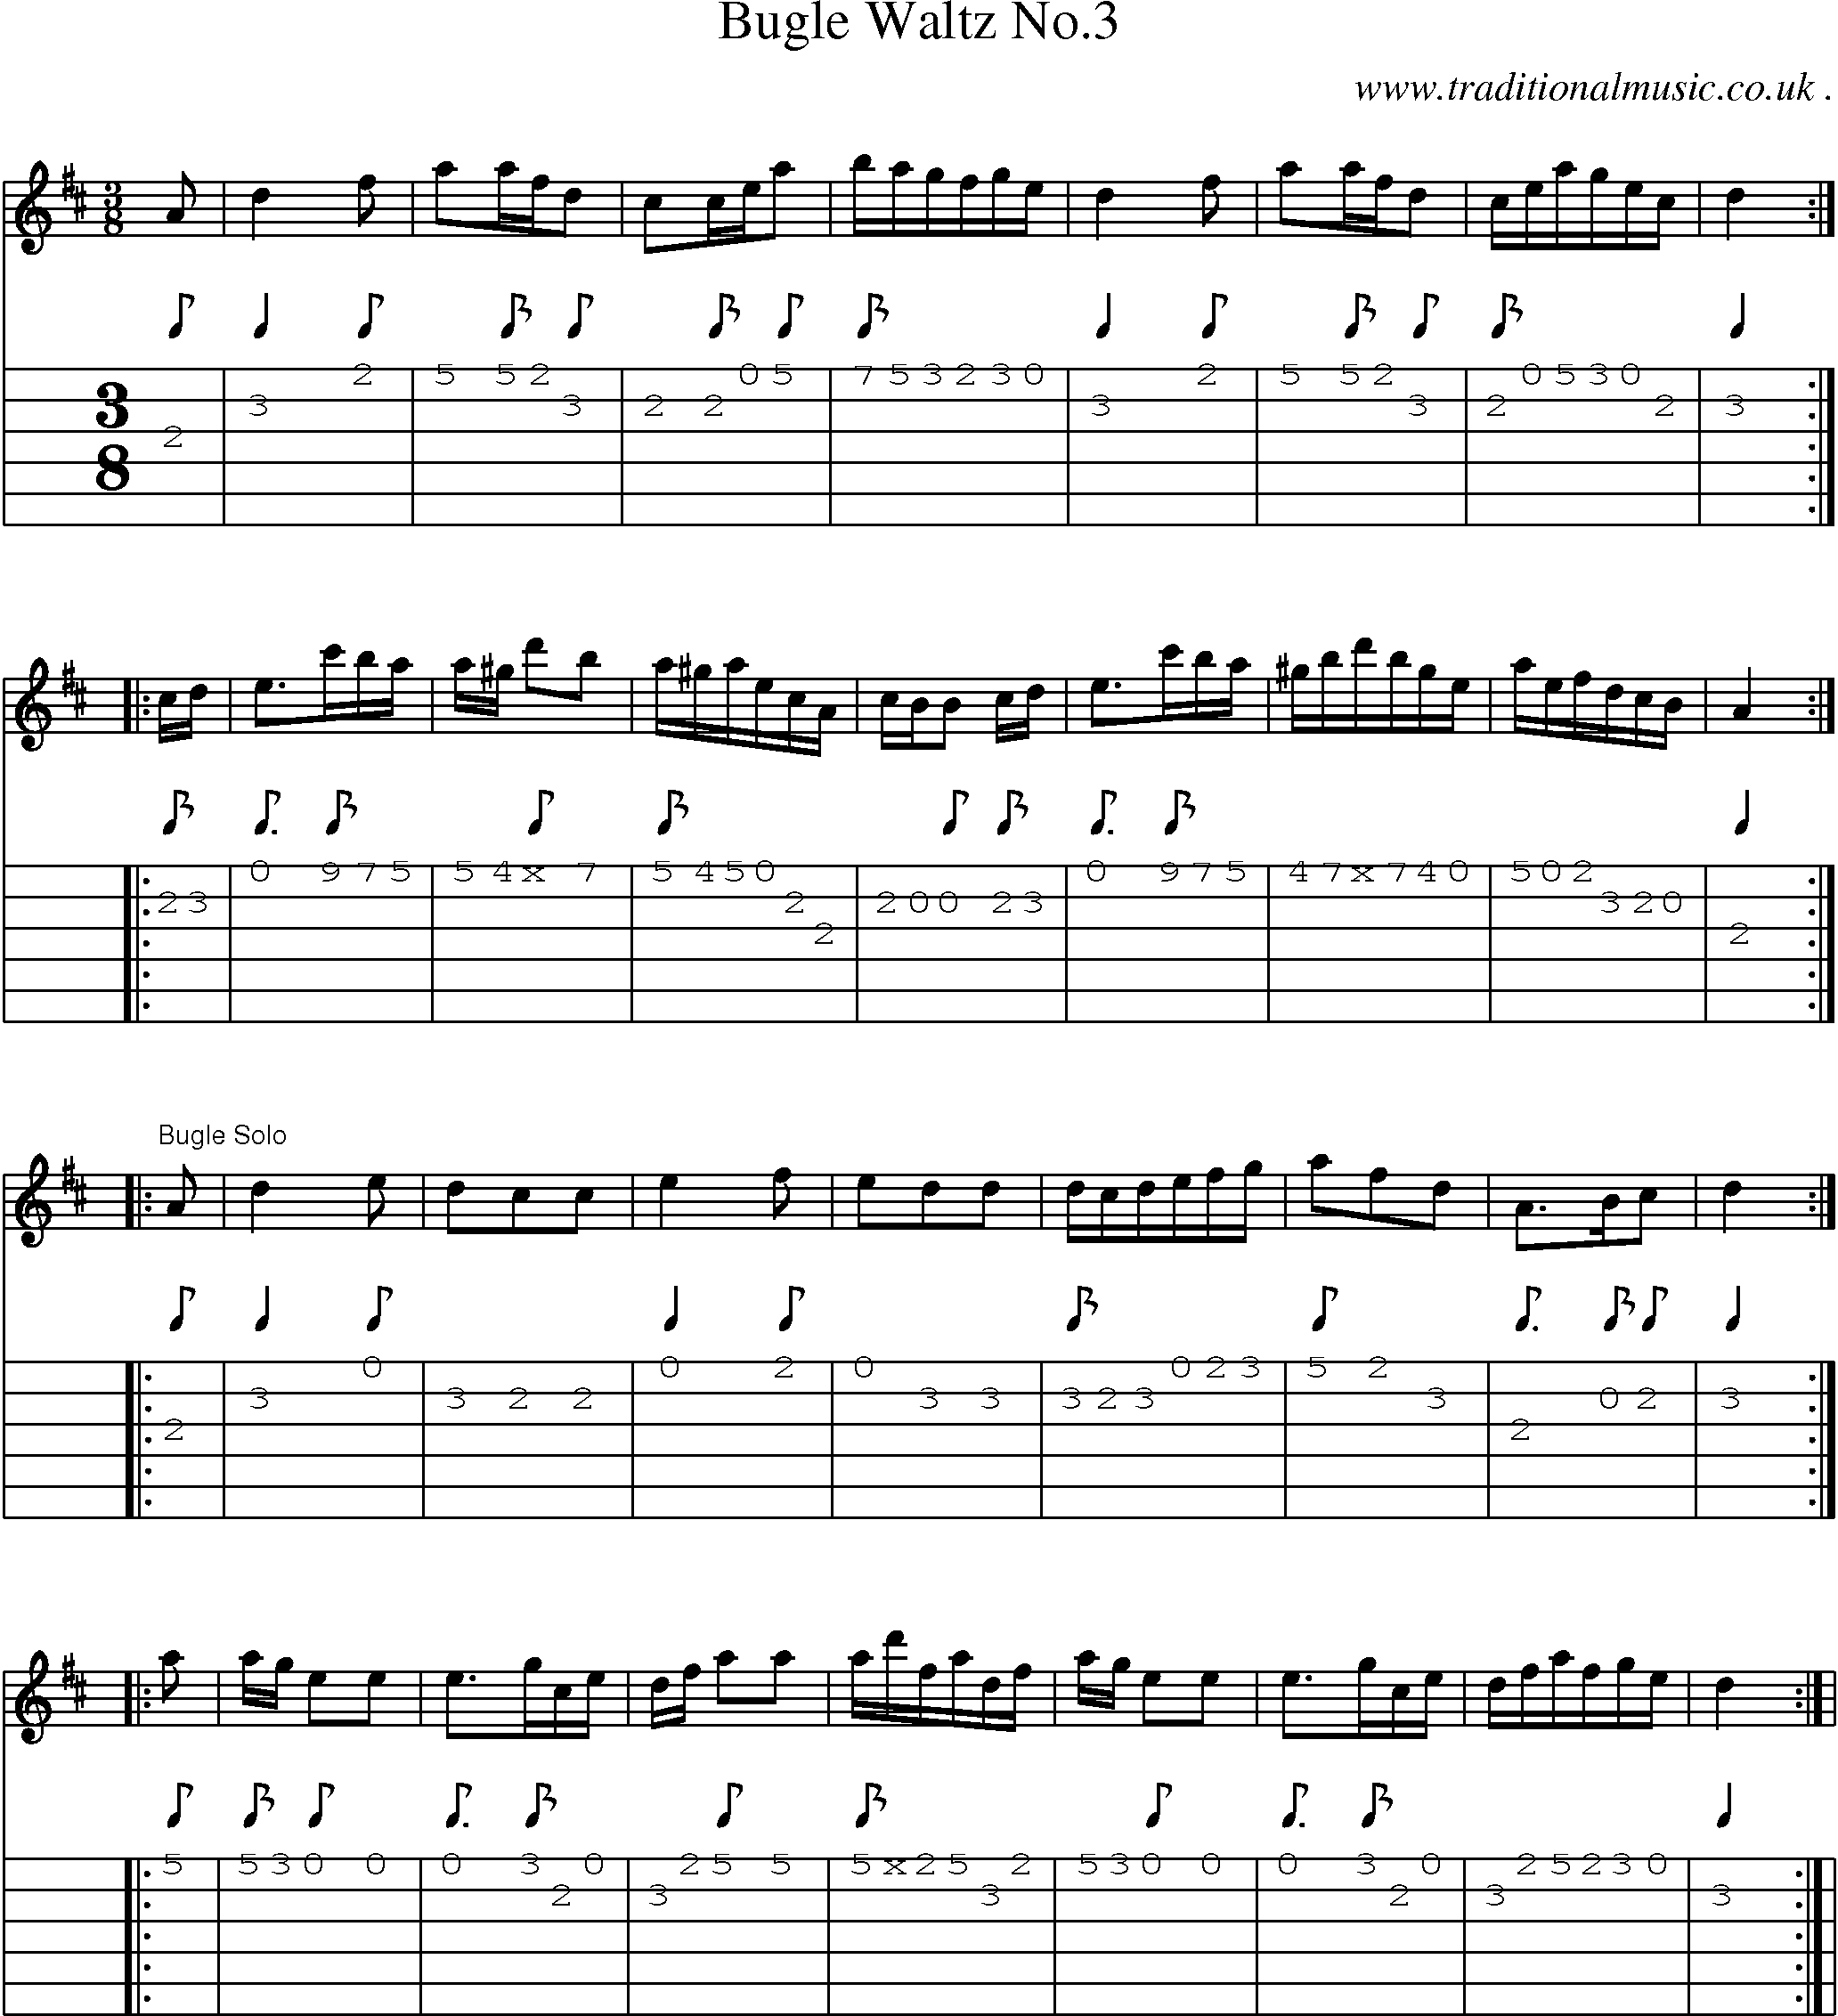 Sheet-Music and Guitar Tabs for Bugle Waltz No3